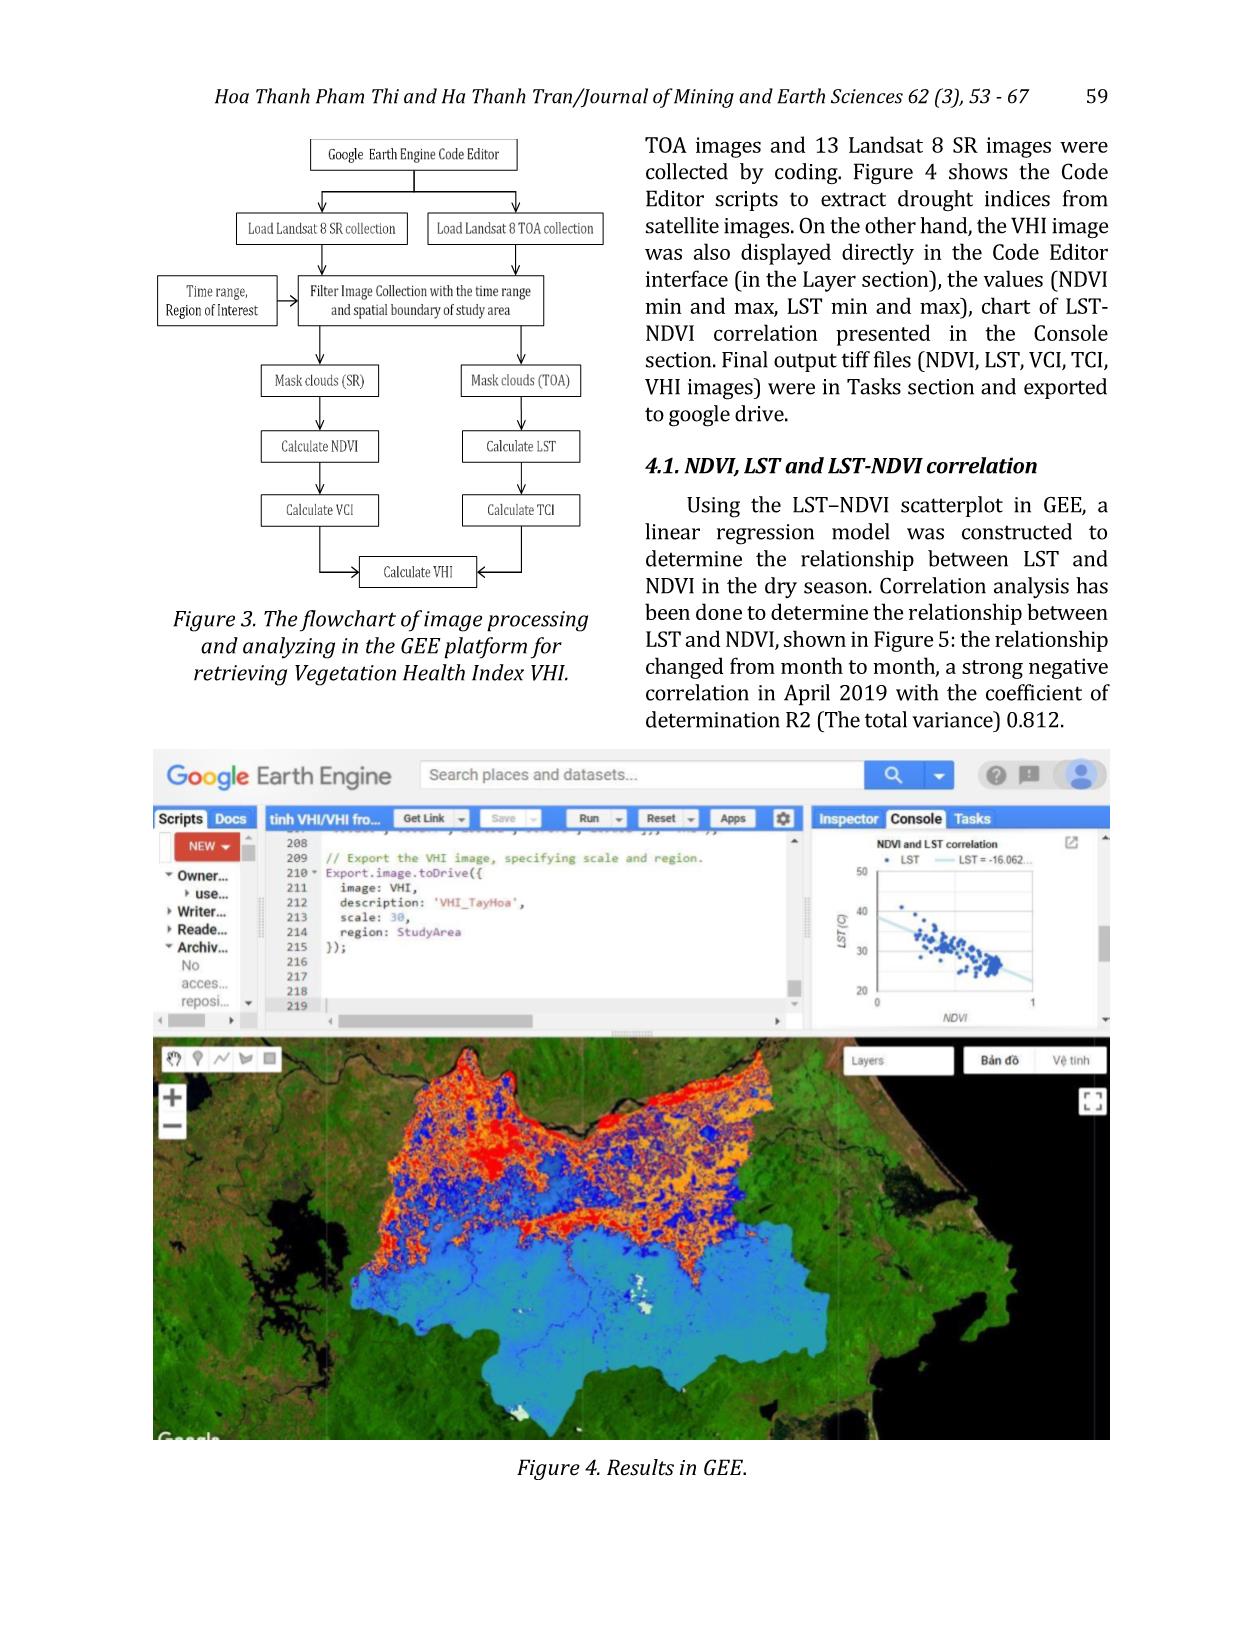 Application of remote sensing imagery and algorithms in Google earth engine platform for drought assessment trang 7